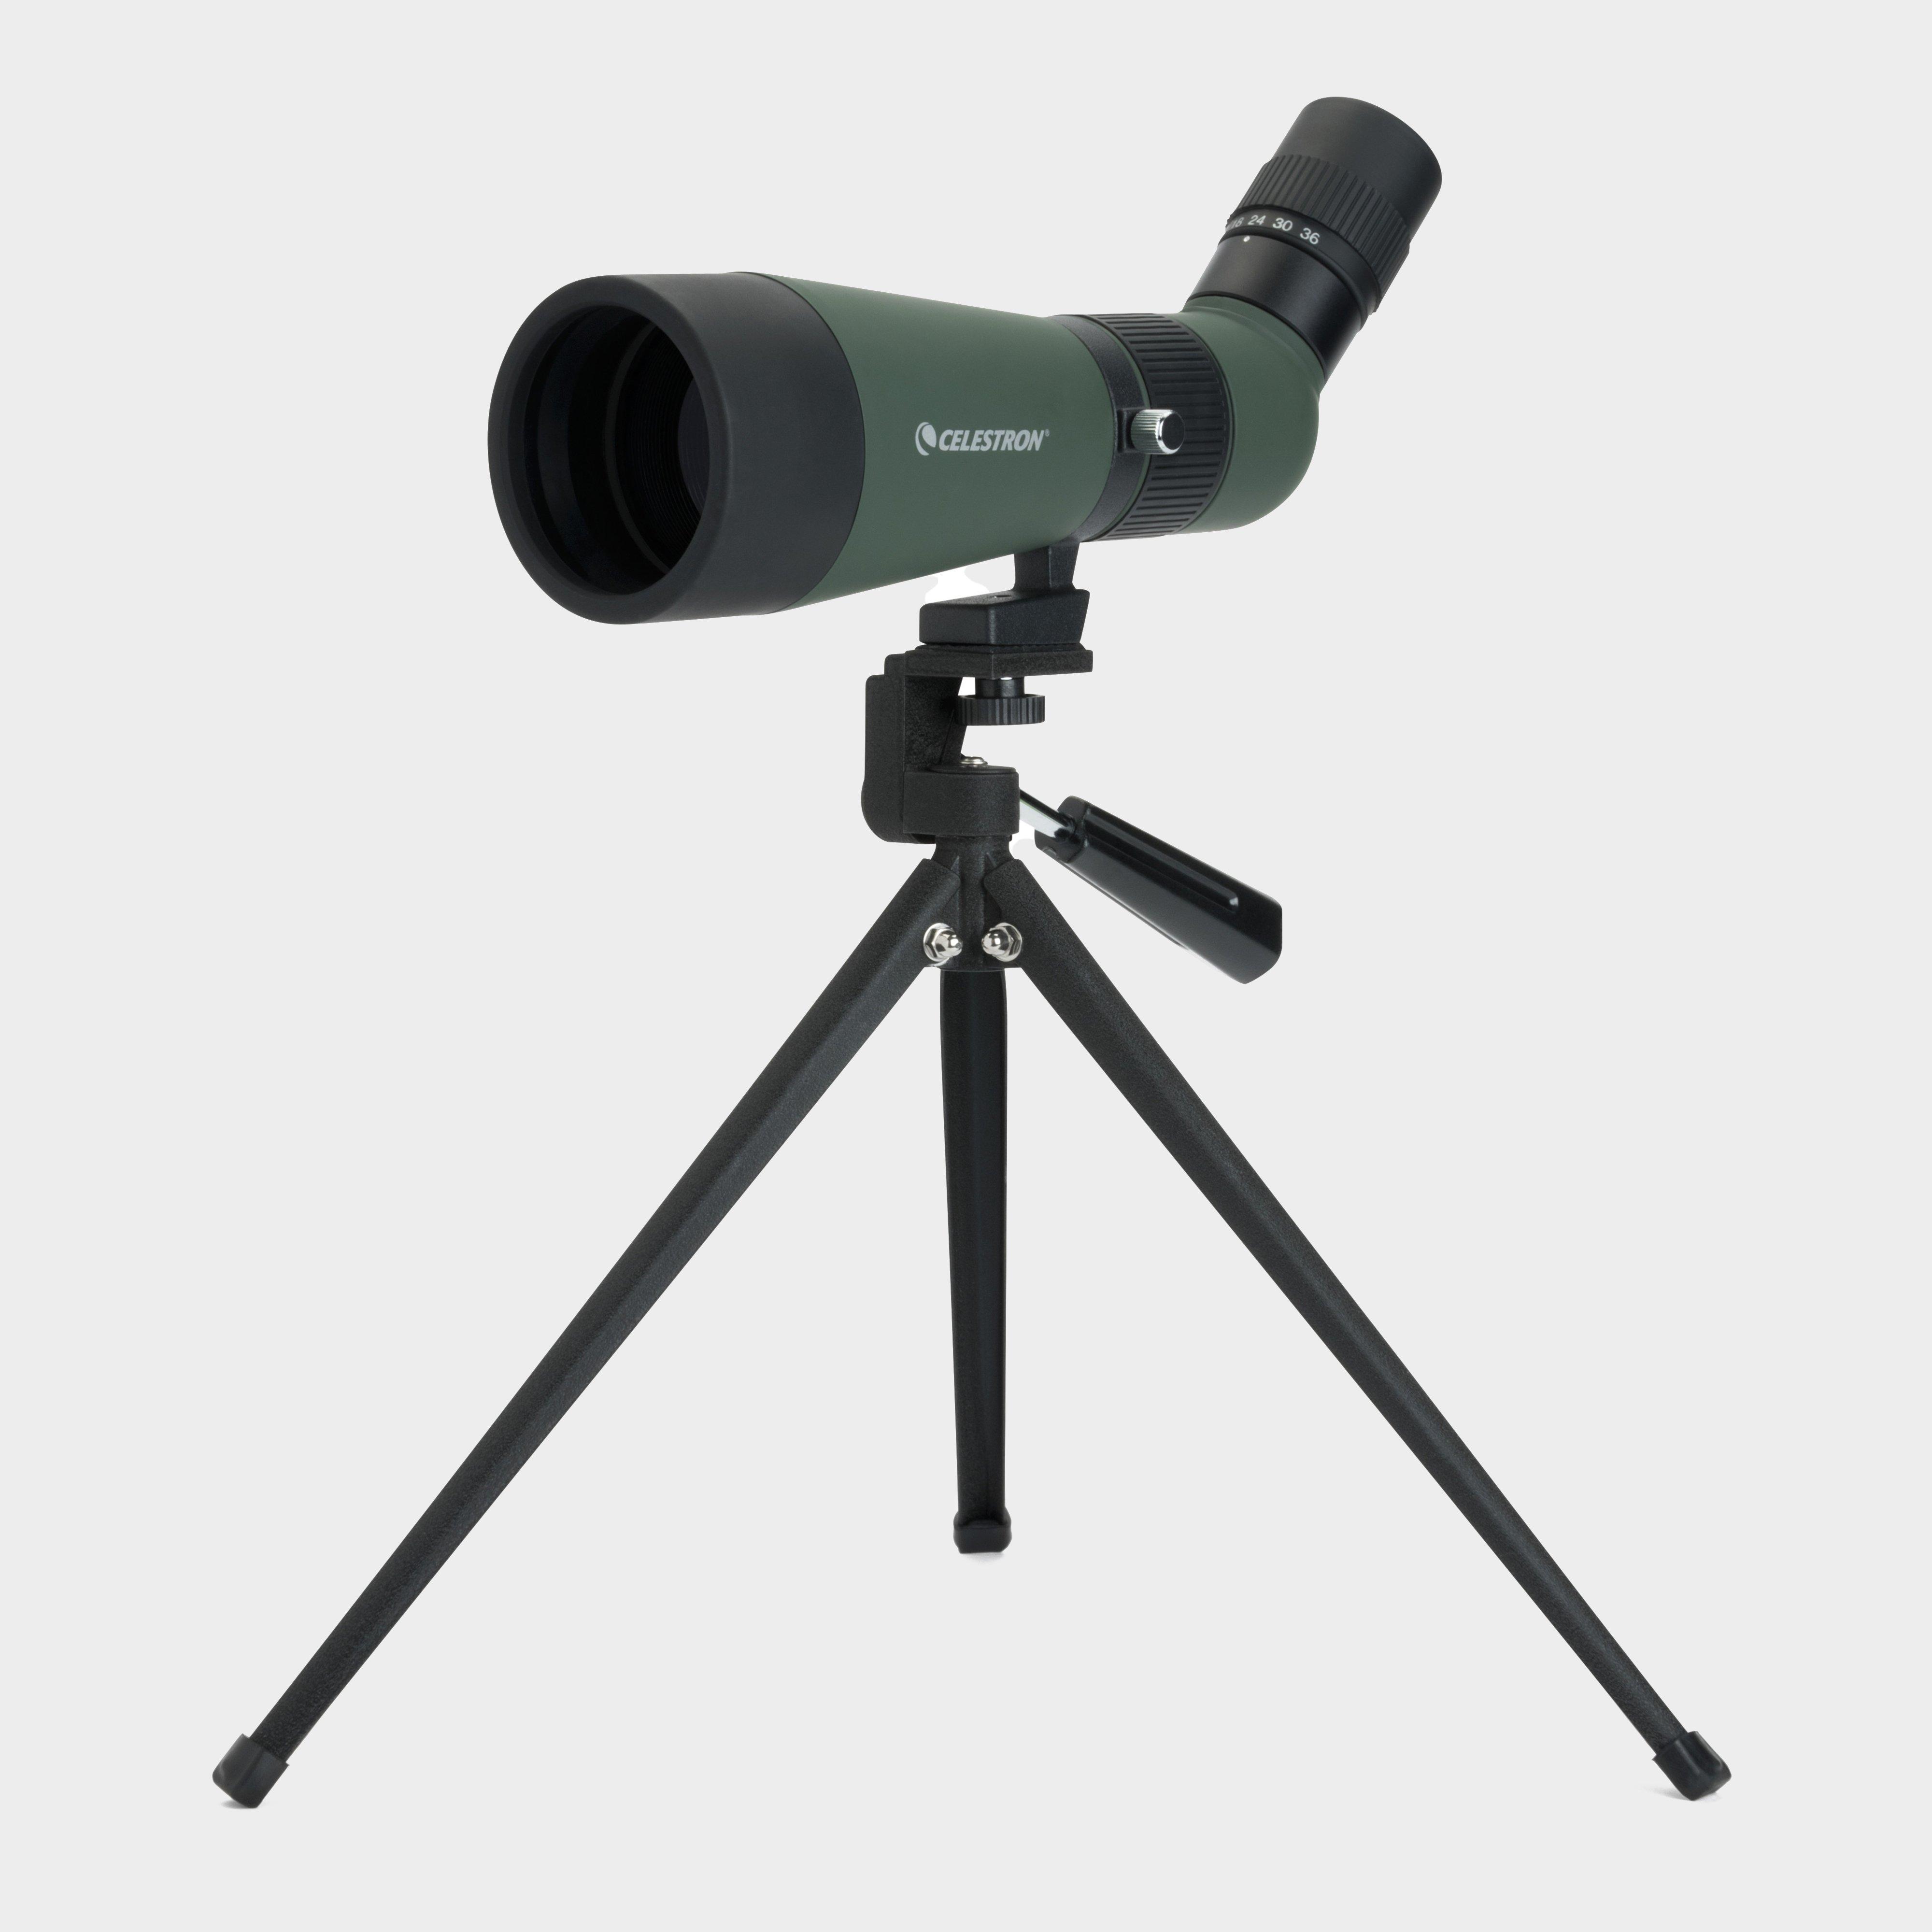 CELESTRON LandScout 12-36 x 60mm Spotting Scope with Smartphone Adapter, Green